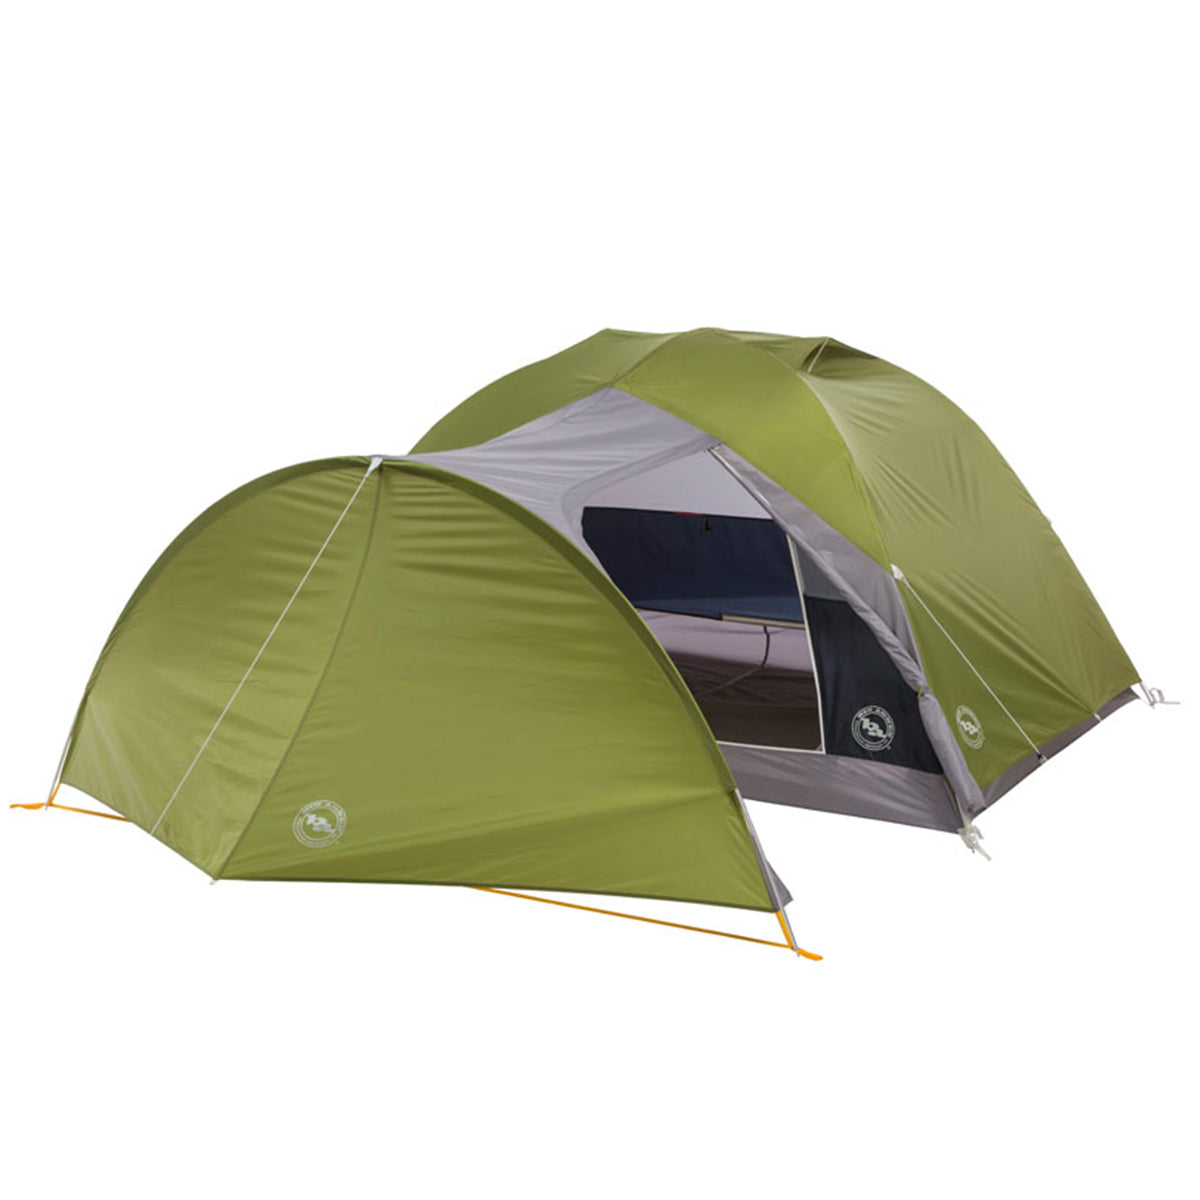 Big Agnes Blacktail Hotel 3 Person Tent in Big Agnes Blacktail Hotel 3 Tent by Big Agnes | Camping - goHUNT Shop by GOHUNT | Big Agnes - GOHUNT Shop